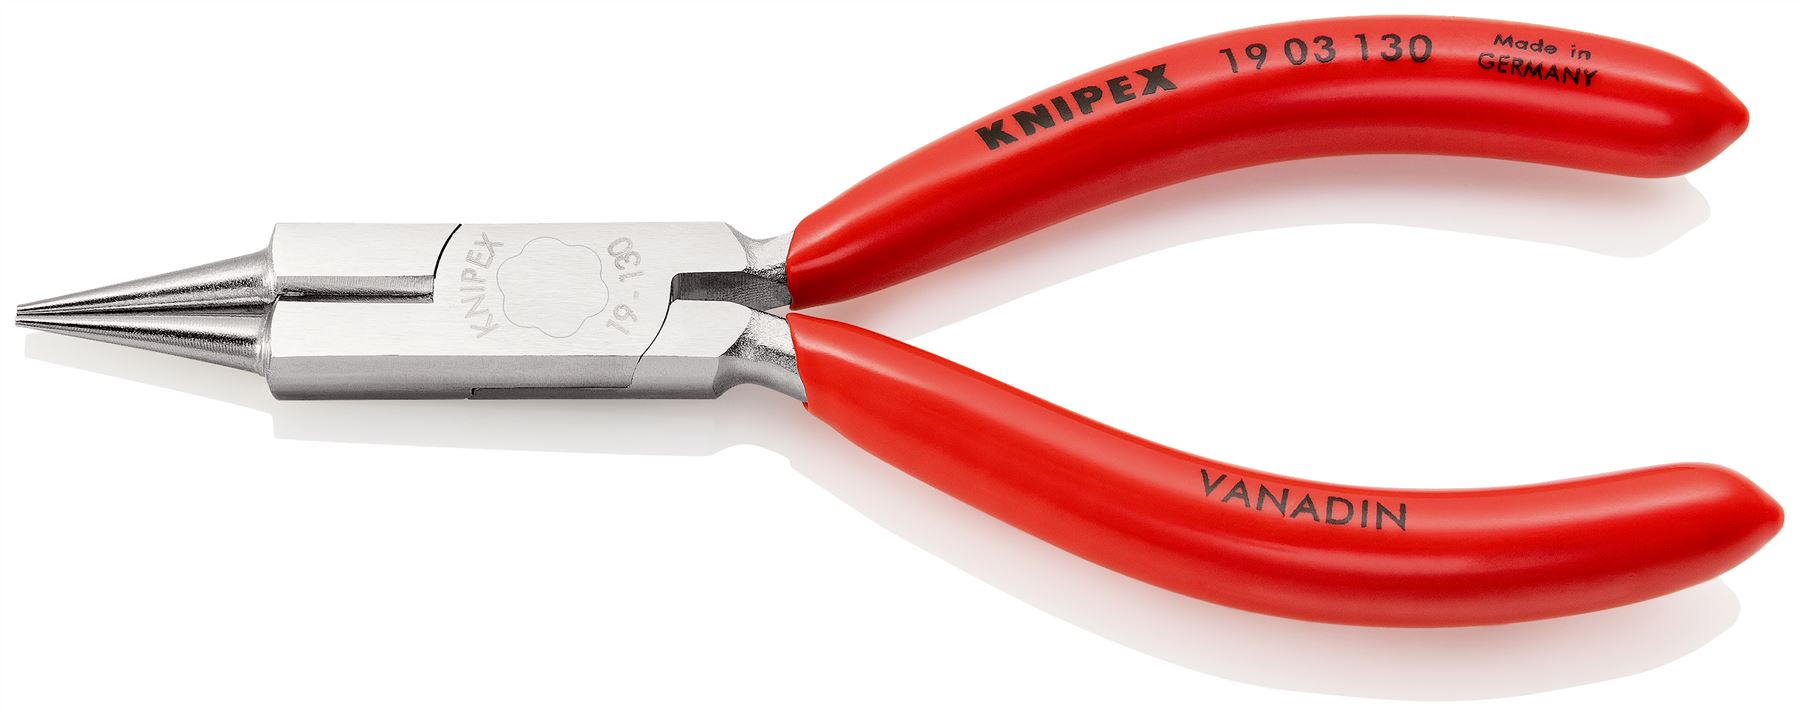 KNIPEX Round Nose Pliers with Cutting Edge Jewellers Pliers 130mm Plastic Coated 19 03 130